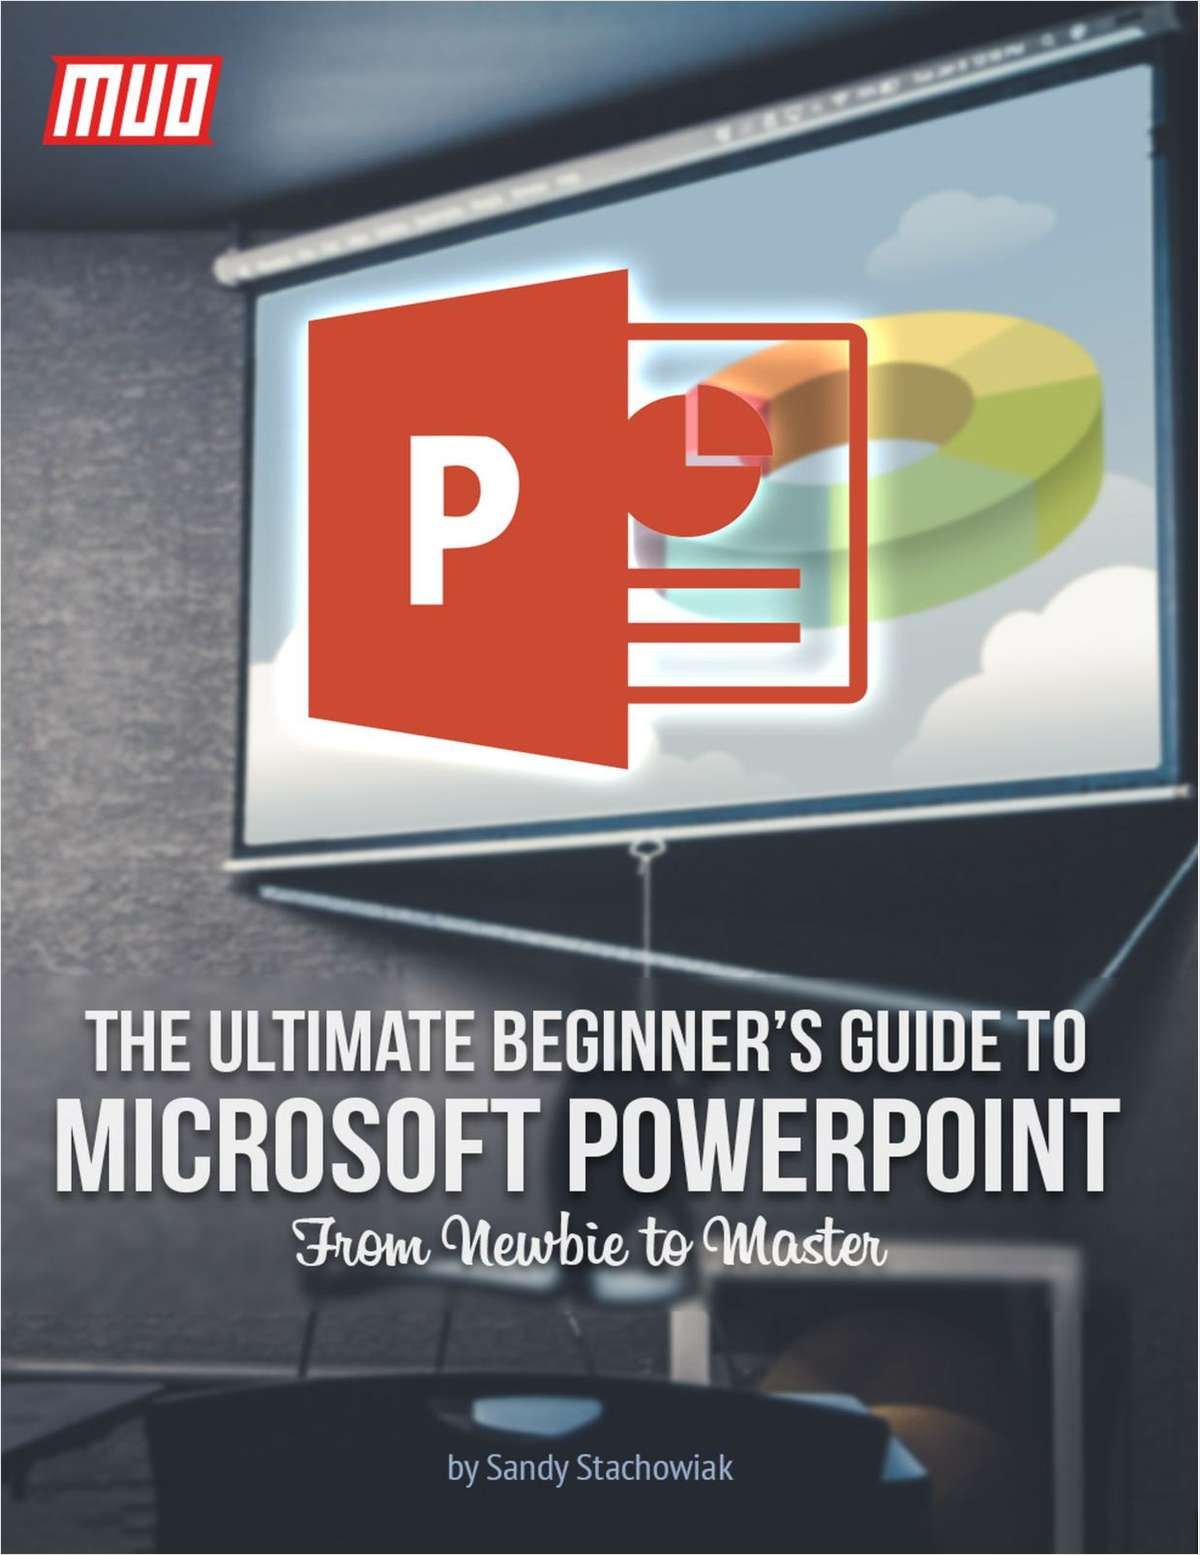 The Ultimate Beginner's Guide to Microsoft PowerPoint